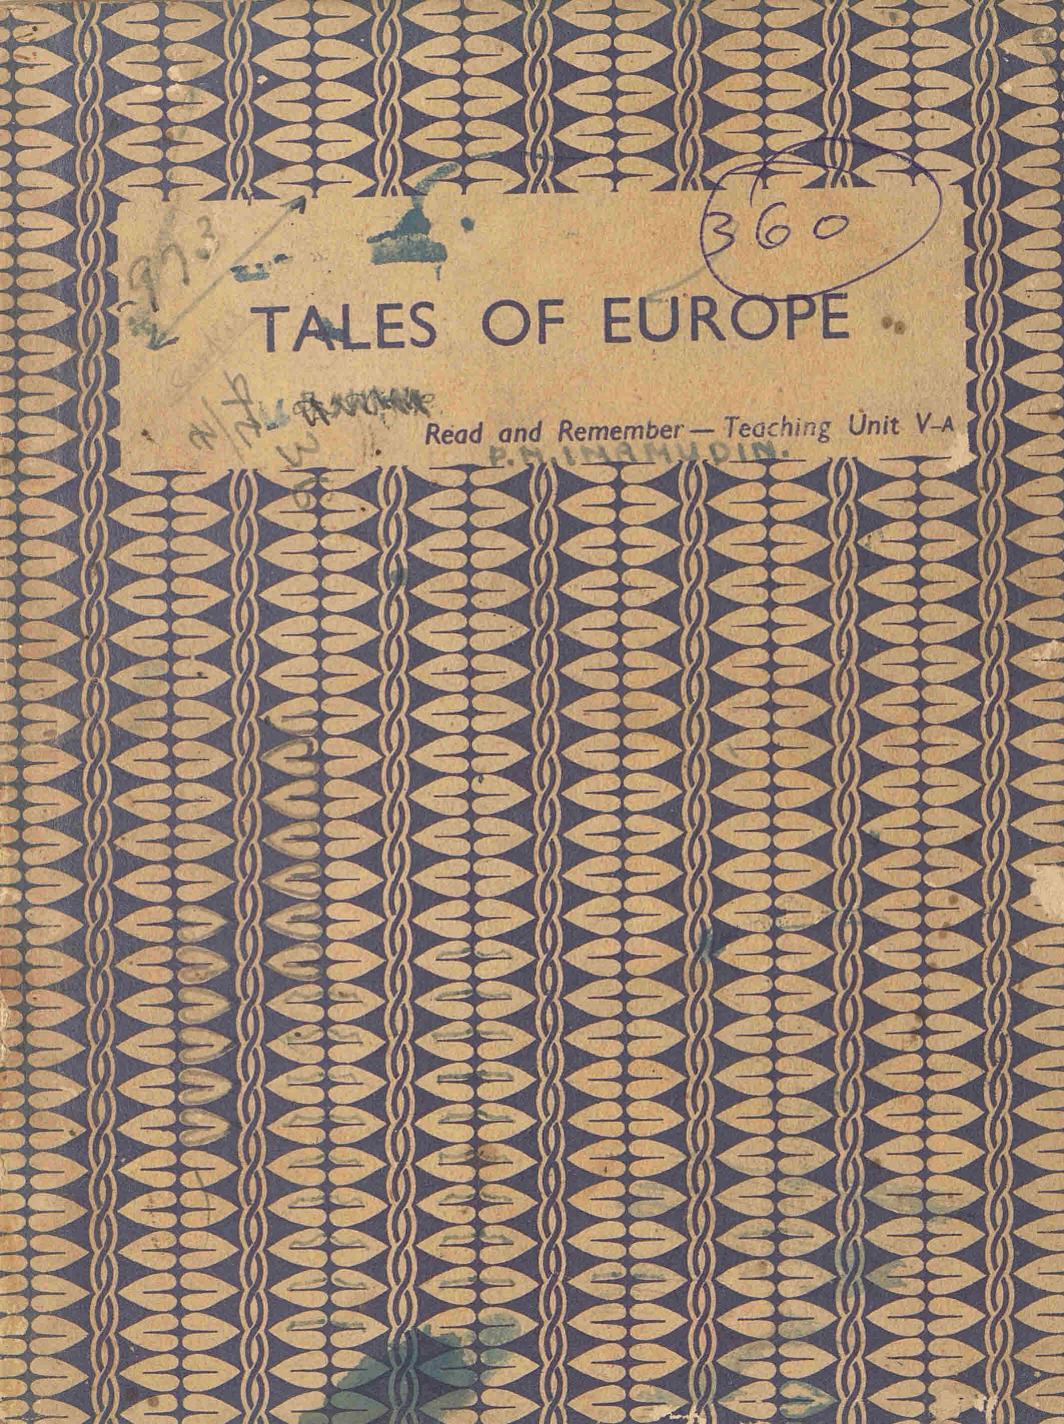  Tales of Europe - Legend and Romance